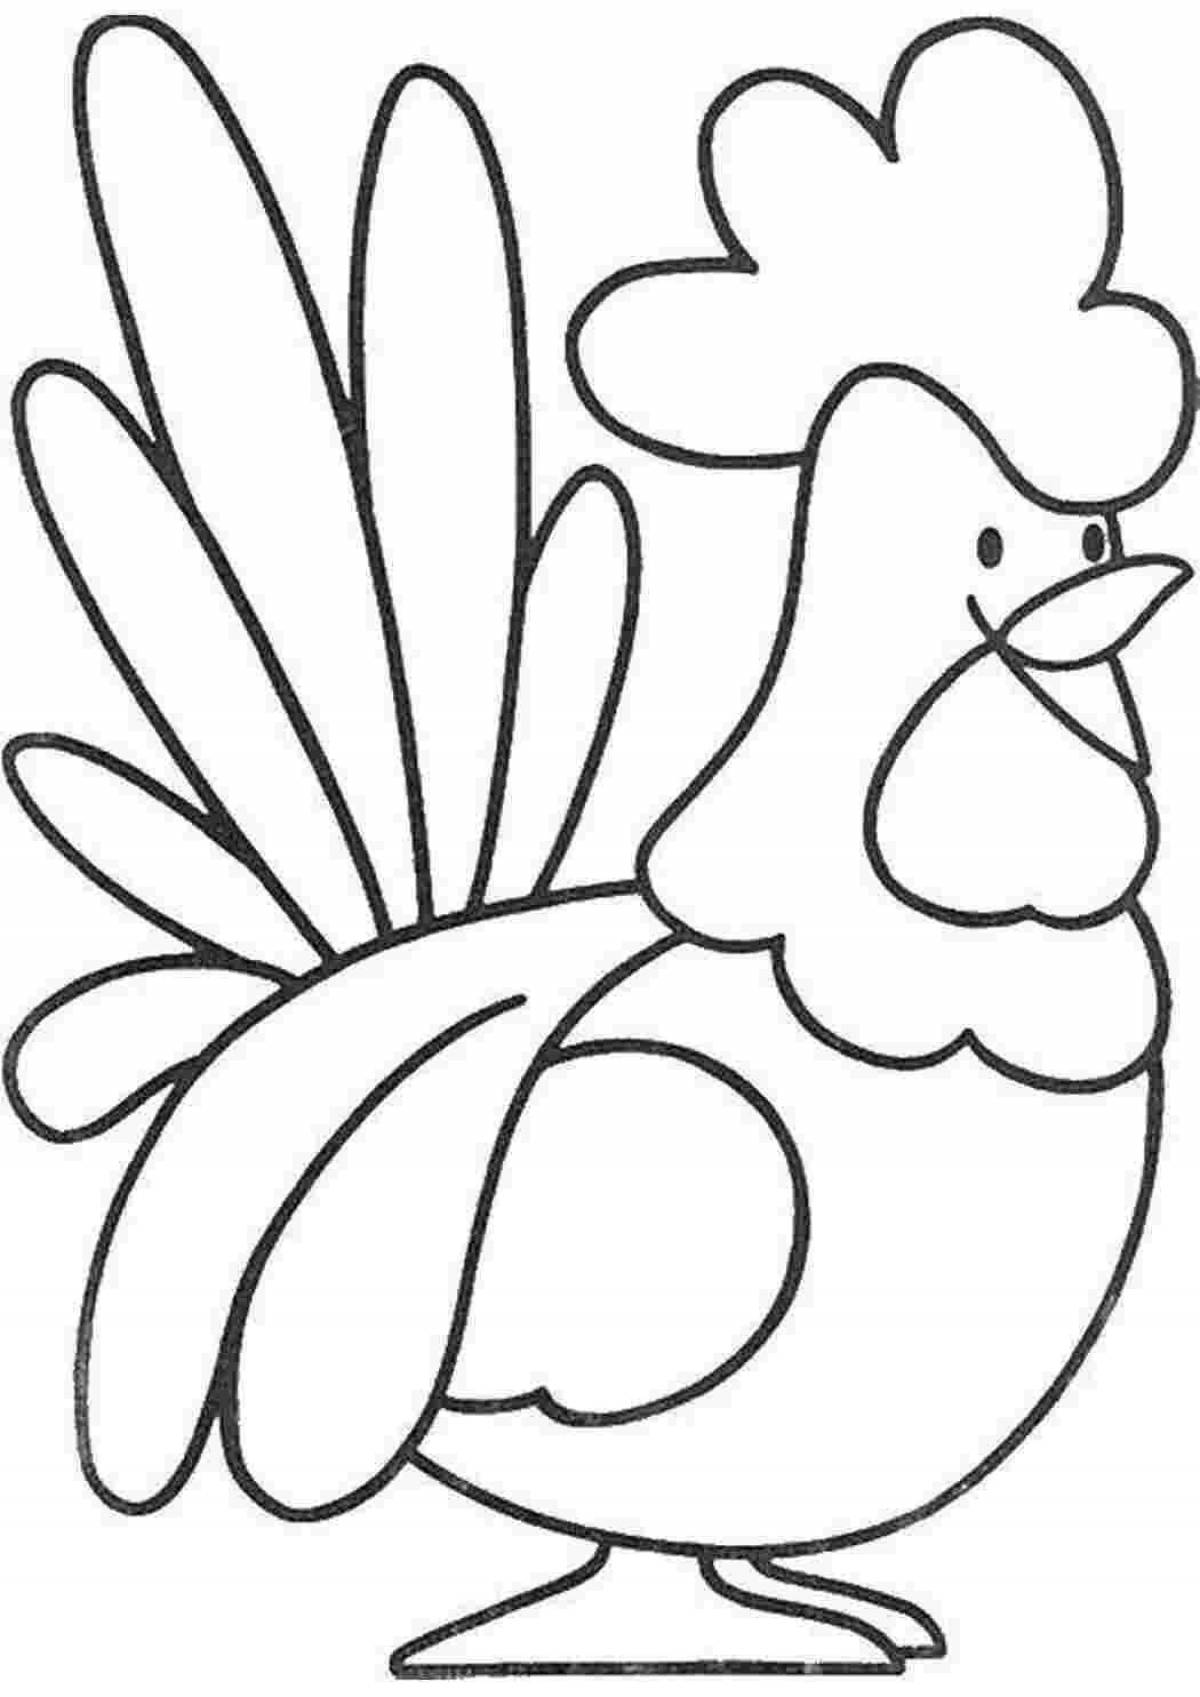 Coloring book witty rooster for children 6-7 years old